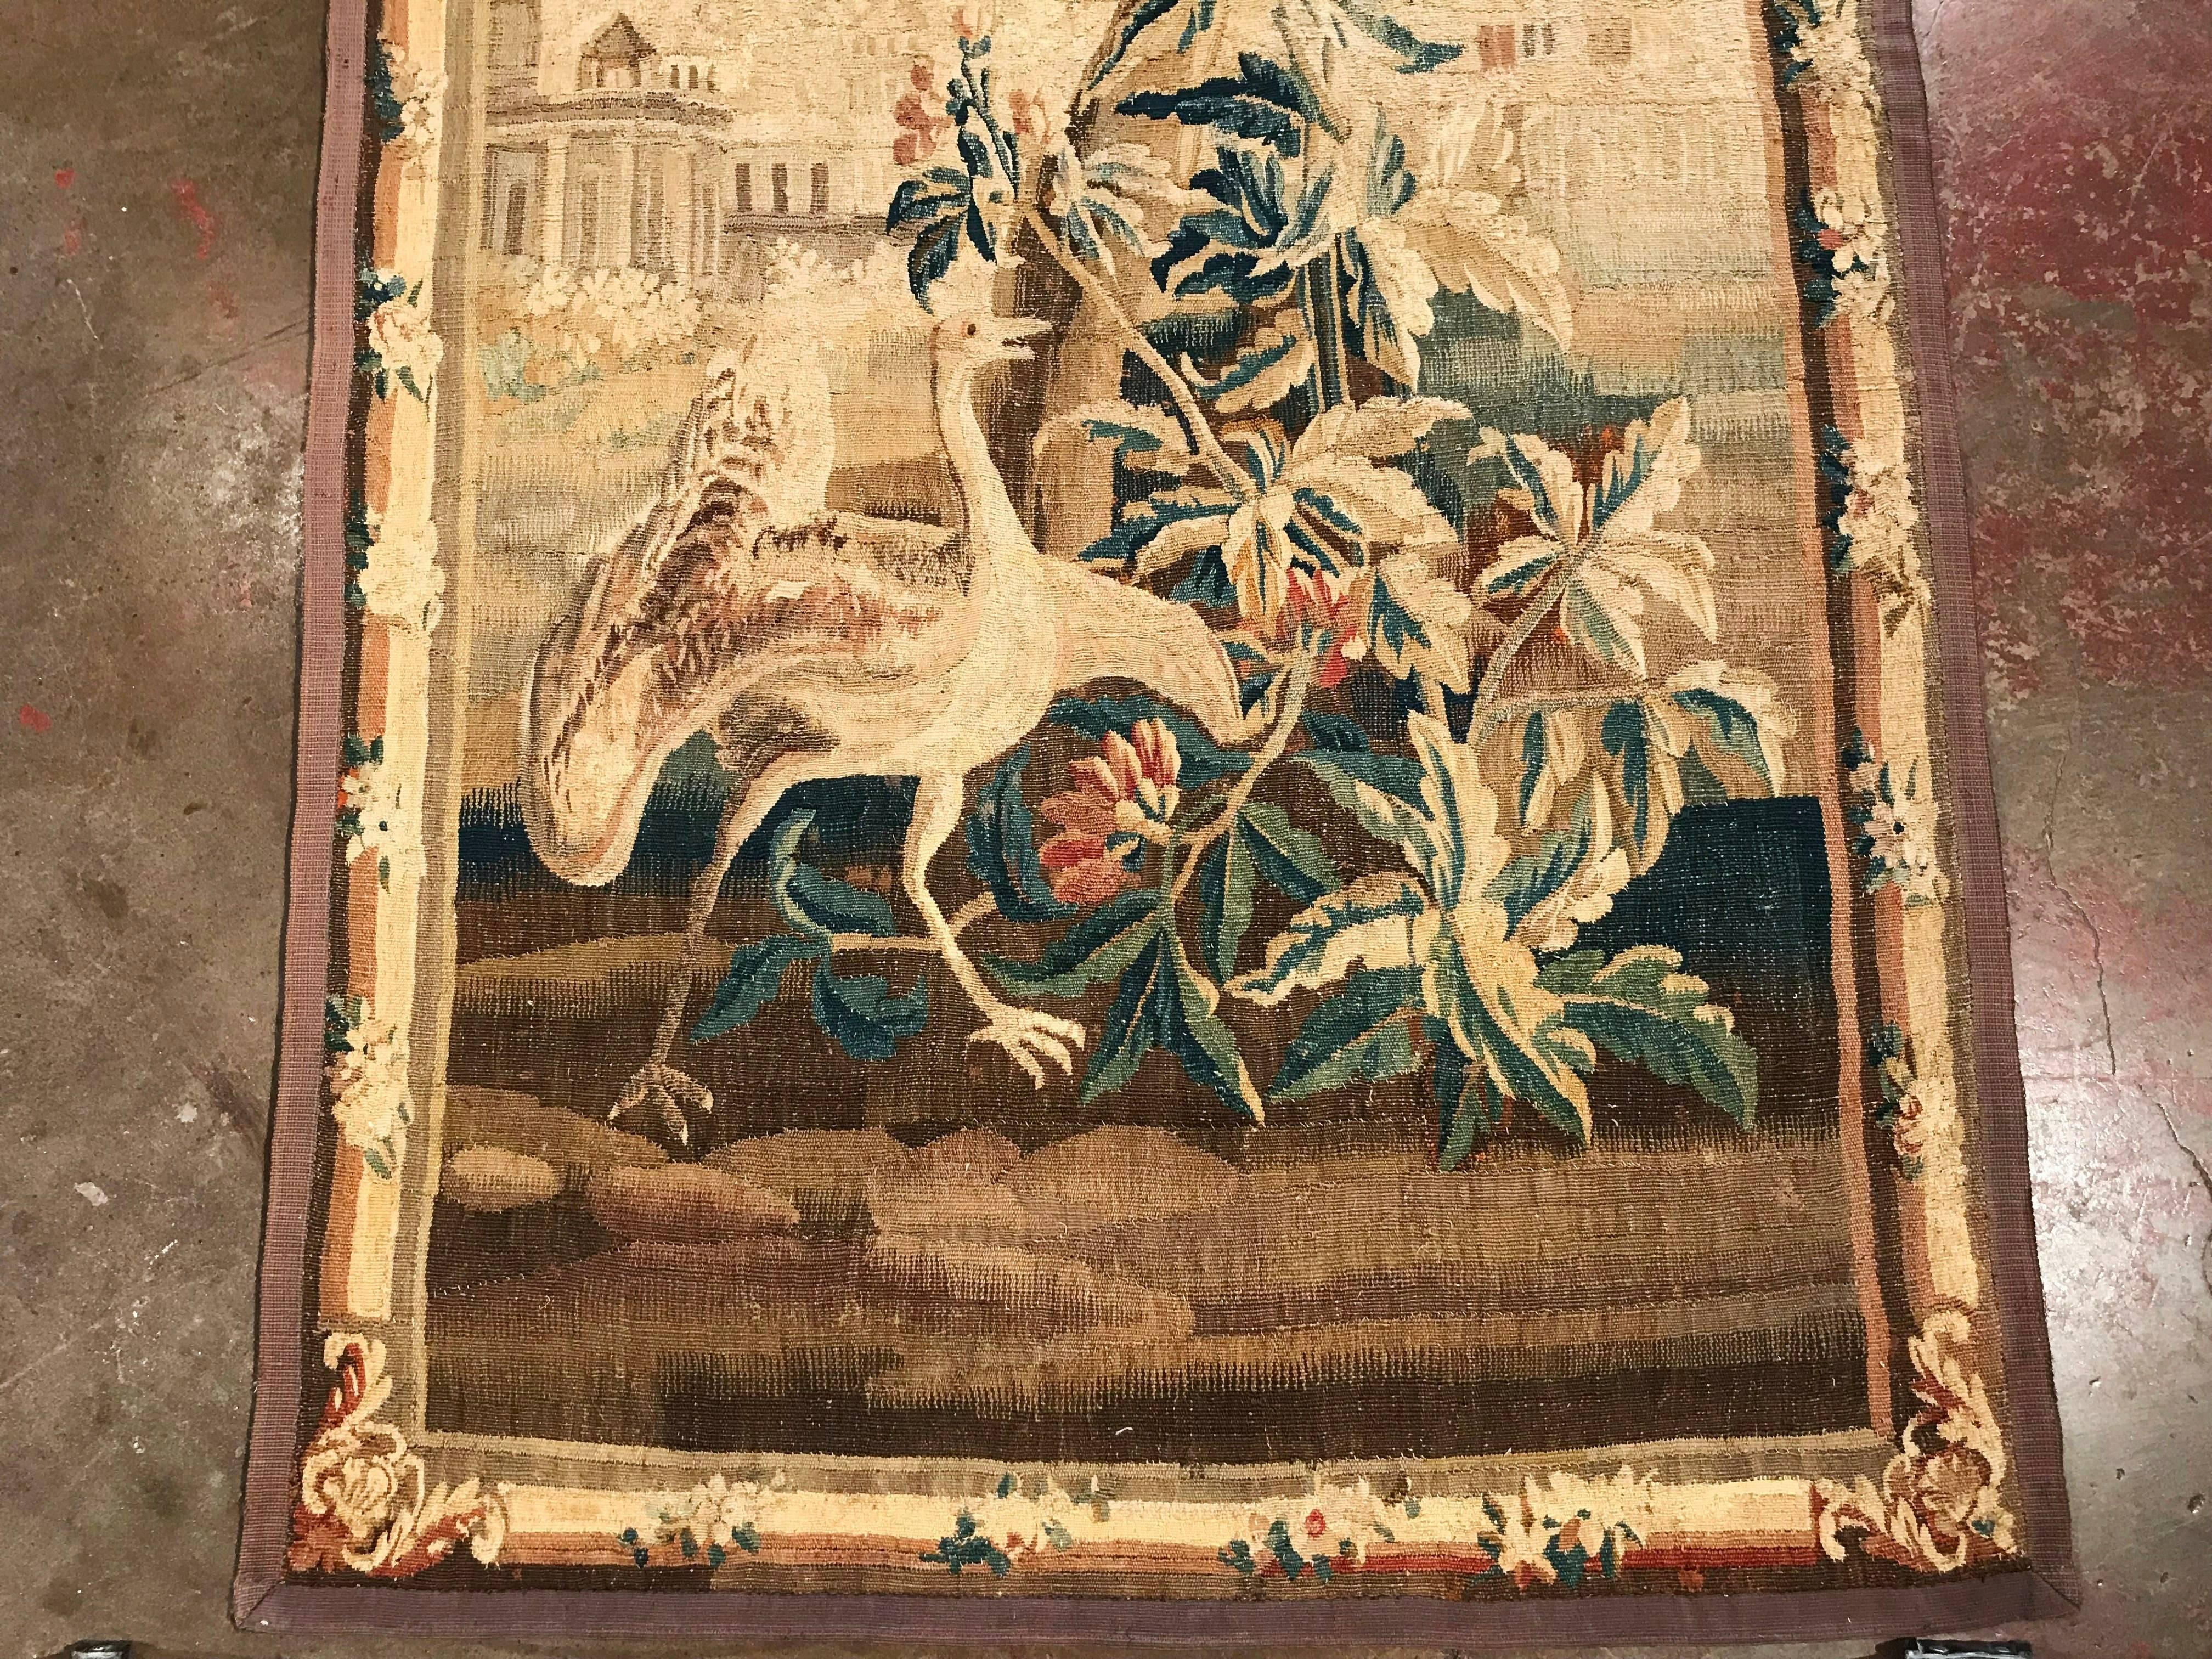 Hang this colorful, antique tapestry in your staircase or between a pair of windows. Hand woven in Aubusson, France, circa 1760, the tall and narrow wall hanging tapestry has its original floral border and illustrates a scene that includes a large